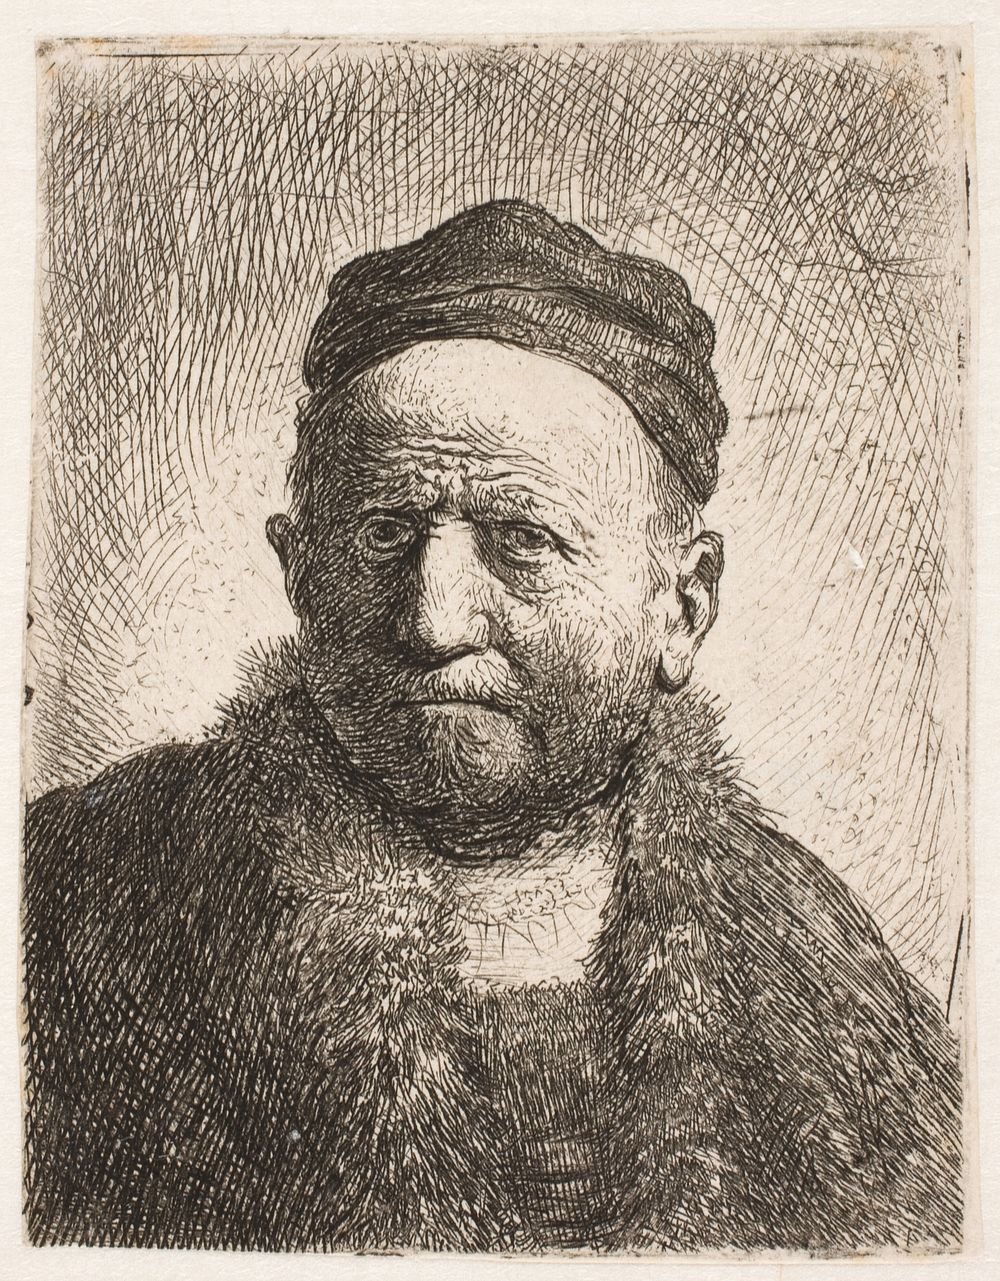 Man with a tight hat (Rembrandt's father?).Small plate by Rembrandt van Rijn